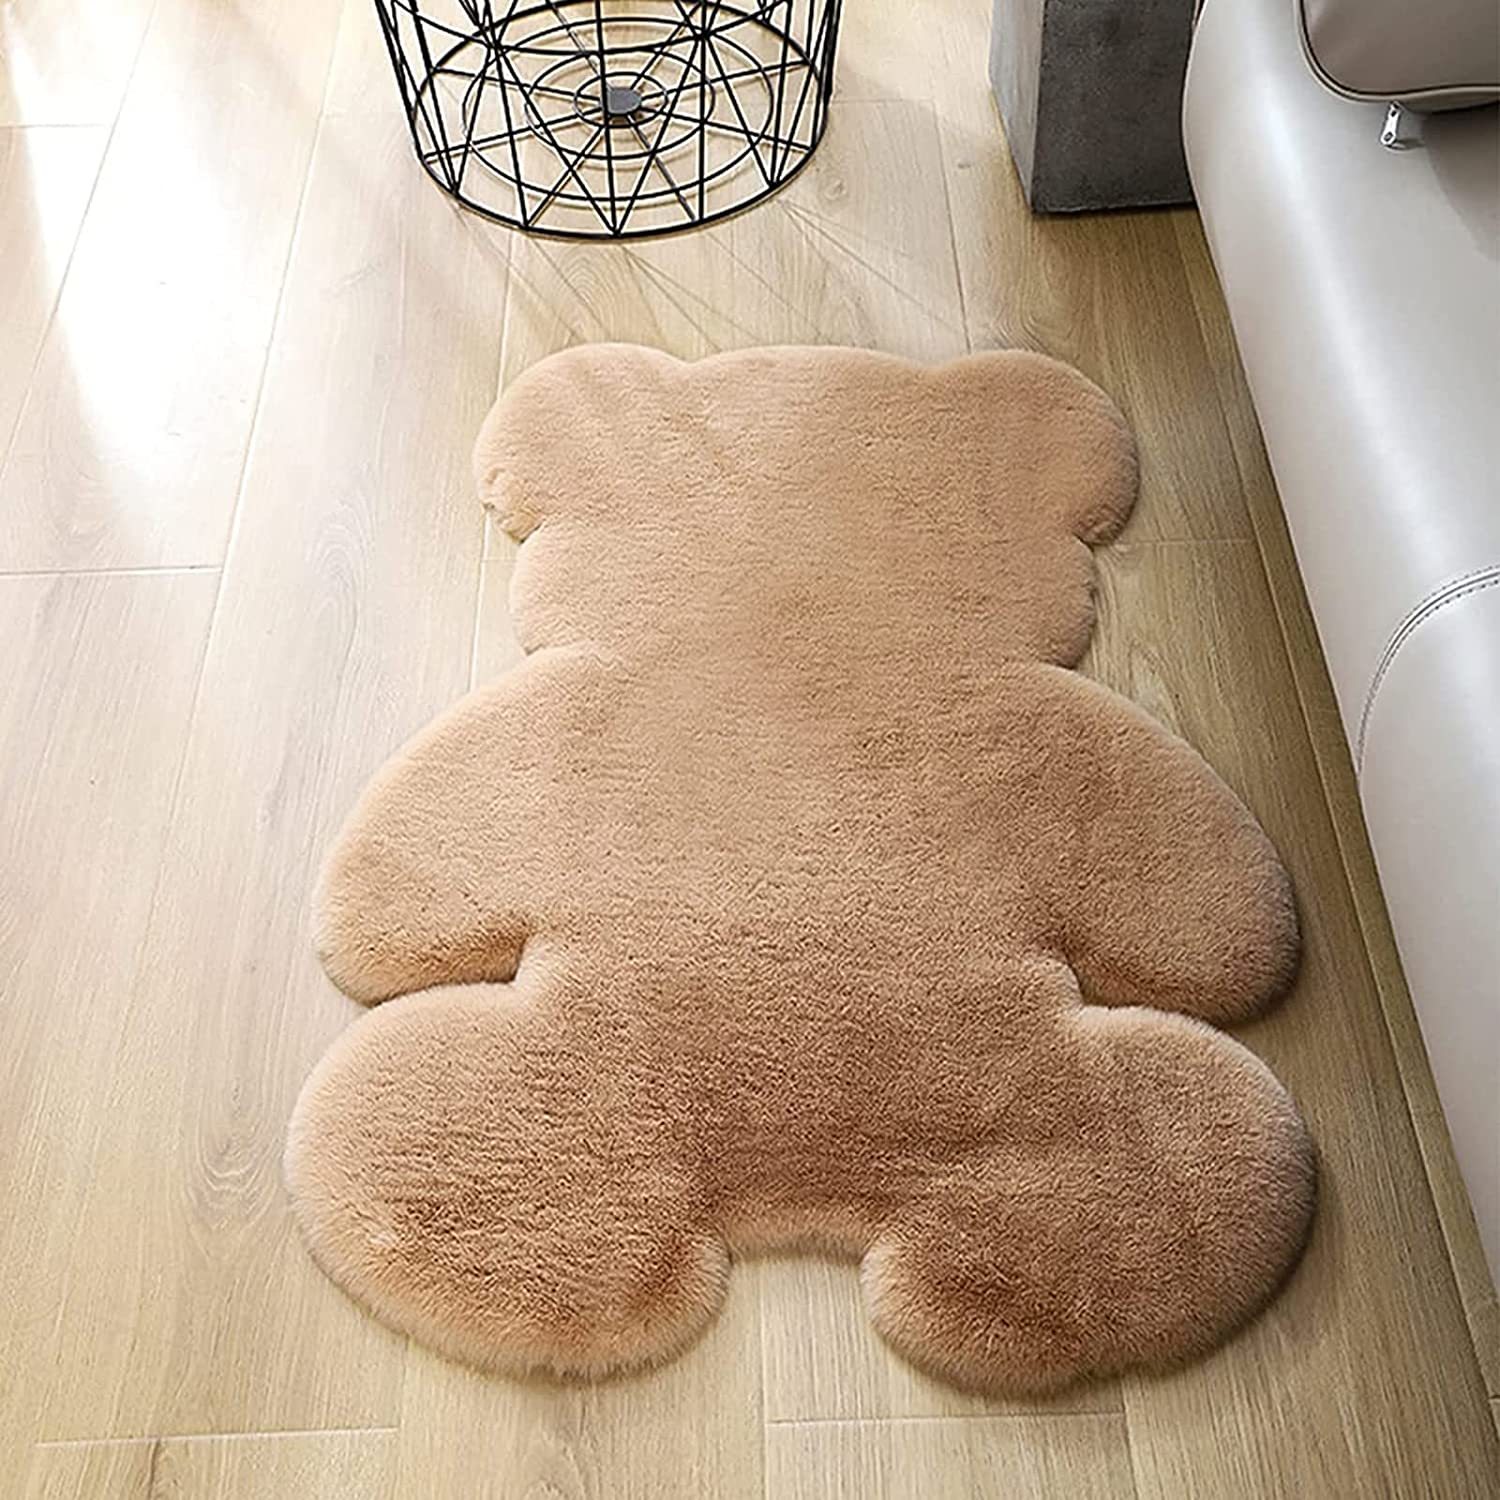 Primary image for Tennola Bear Shaped Area Rug Cute Bedroom Rugs Soft Fluffy Faux Fur Carpet Fuzzy